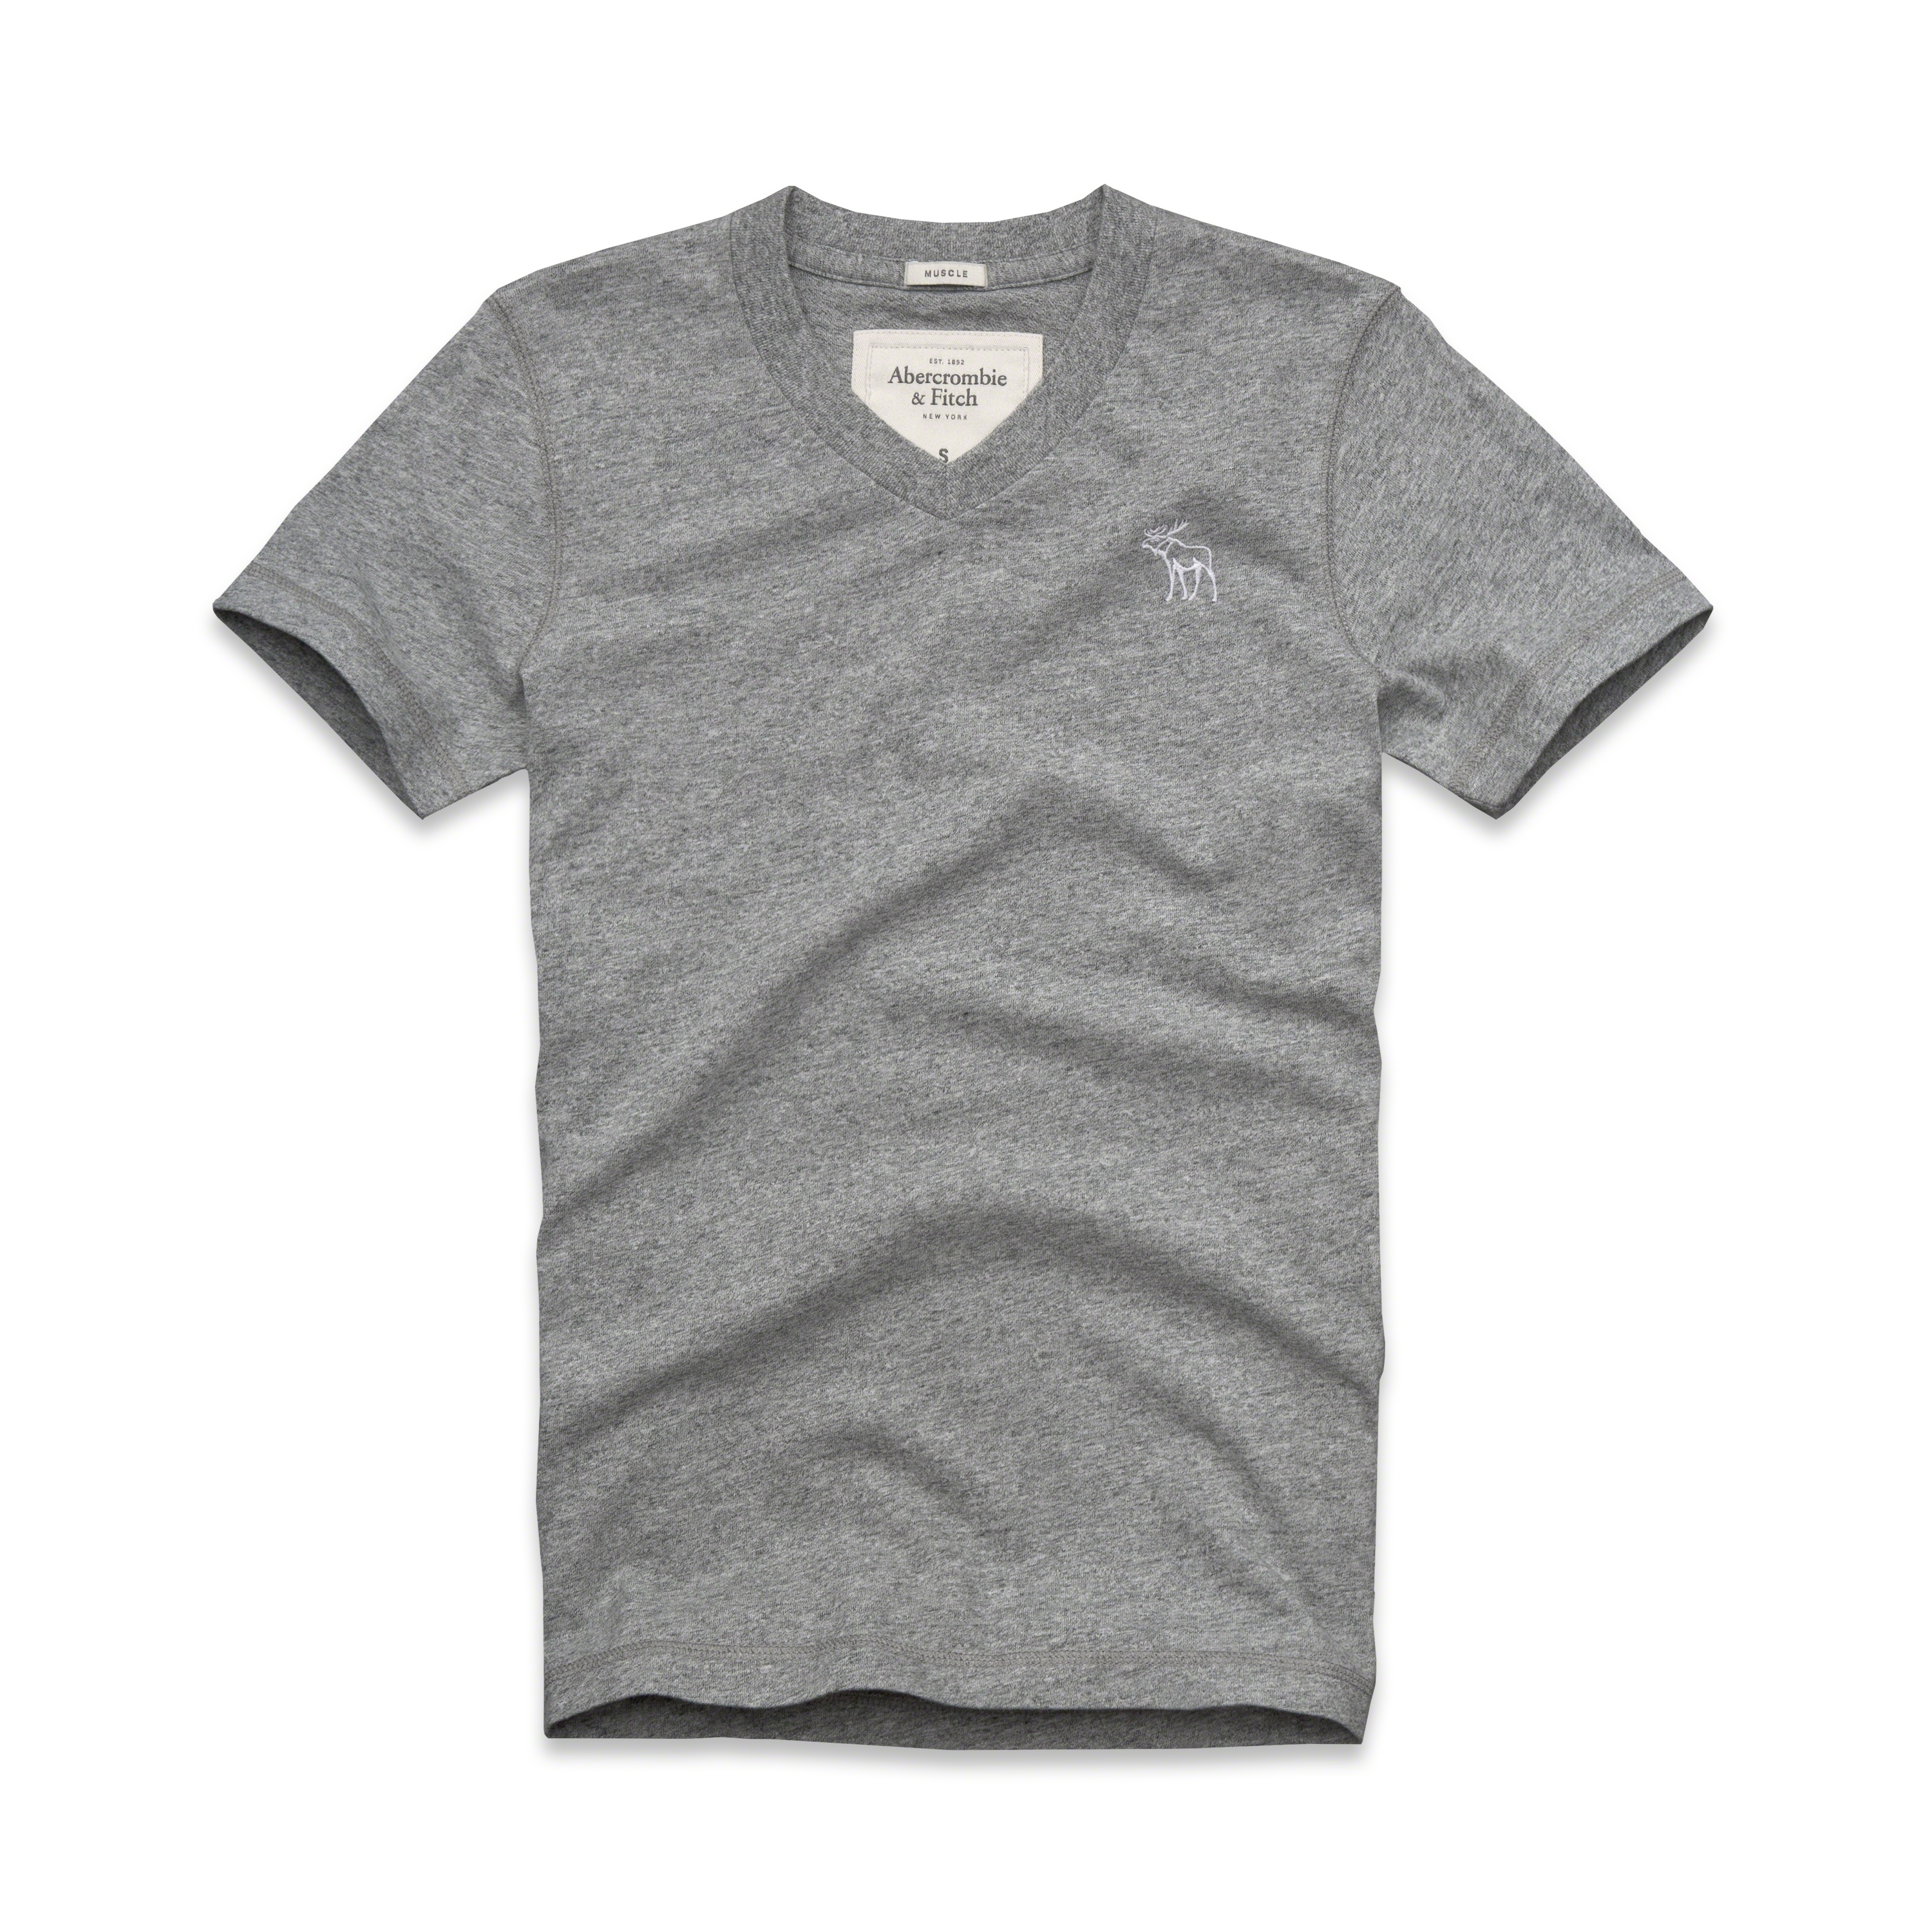 Lyst - Abercrombie & Fitch Hunters Pass V-neck Tee in Gray for Men